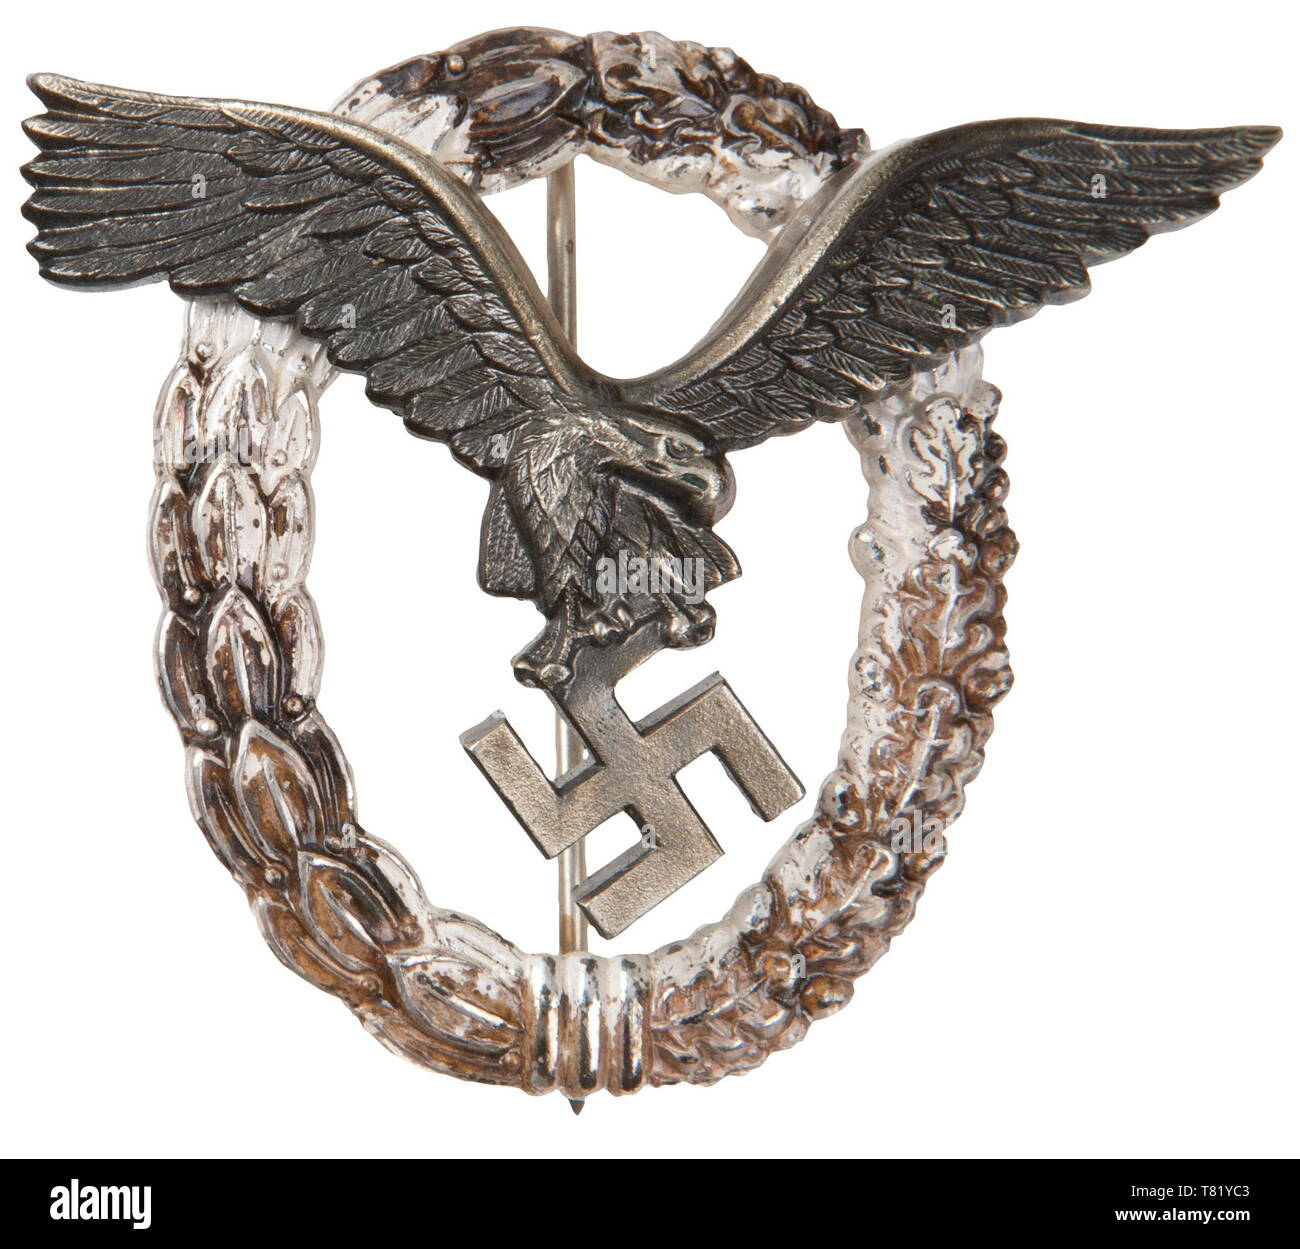 A Luftwaffe Pilot's Badge Maker G.W.L. Early Tombak example. USA-Los historic, historical, awards, award, German Reich, Third Reich, Nazi era, National Socialism, object, objects, stills, medal, decoration, medals, decorations, clipping, cut out, cut-out, cut-outs, honor, honour, National Socialist, Nazi, Nazi period, 20th century, Editorial-Use-Only Stock Photo